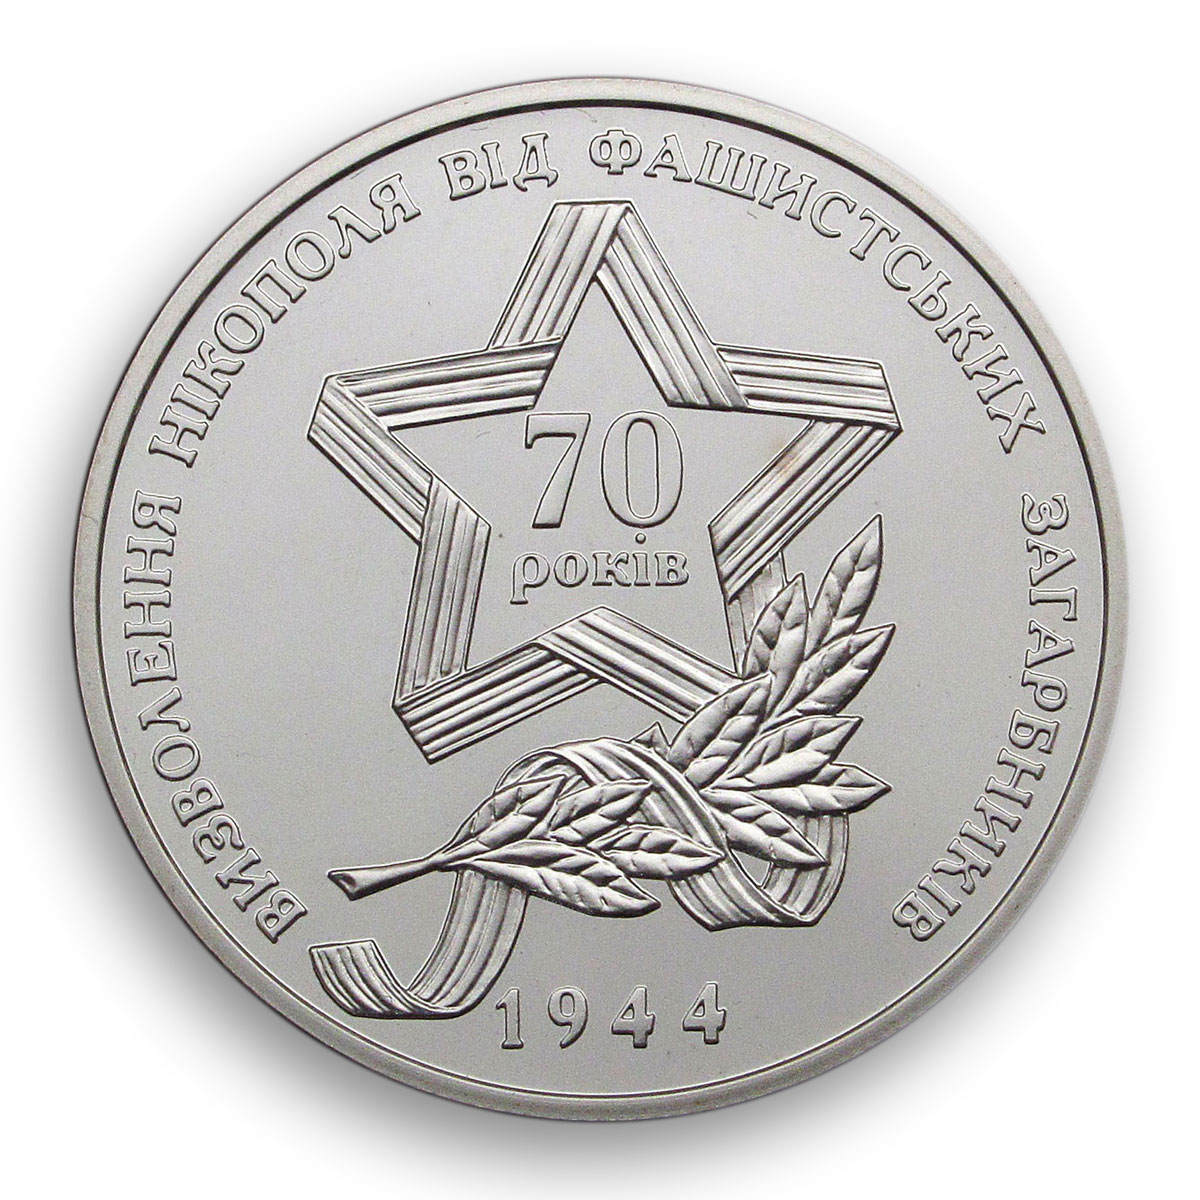 Ukraine 5 hryvnia 70 years Liberation of Nikopol from fascists nickel coin 2014